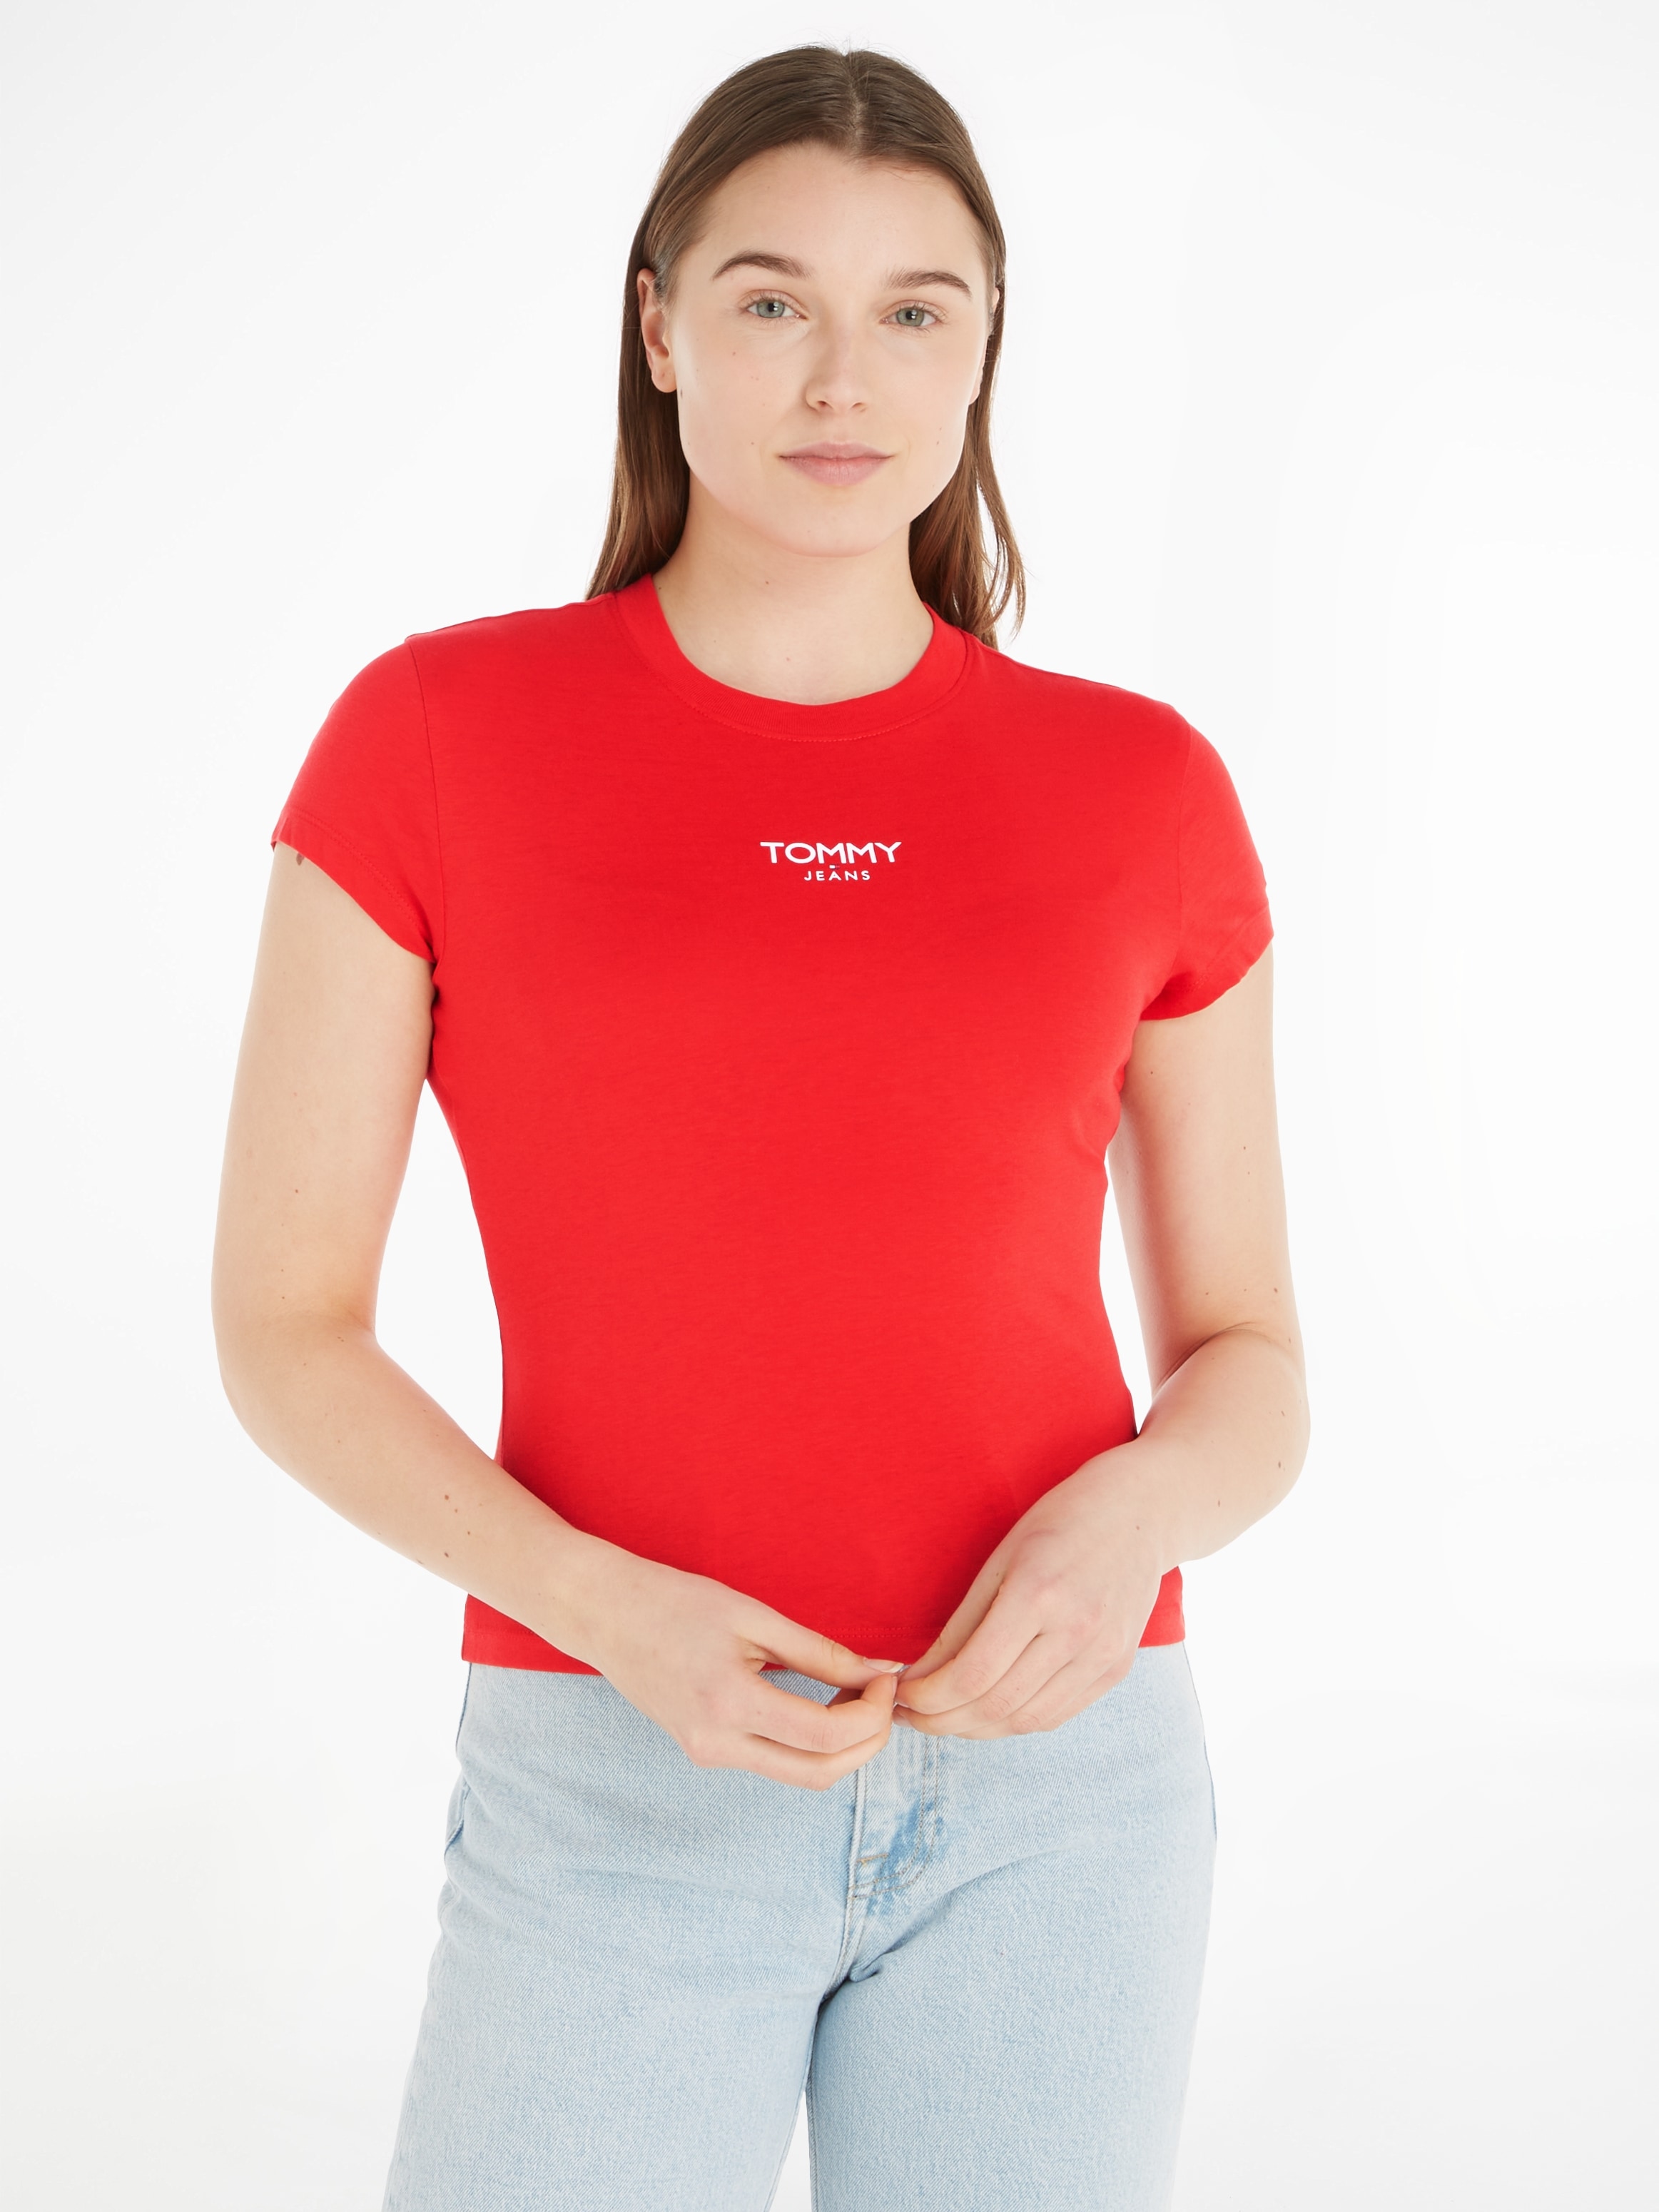 Tommy Jeans T-Shirt »TJW BBY LOGO OTTOversand Tommy Logo mit 1 Jeans ESSENTIAL bei SS«